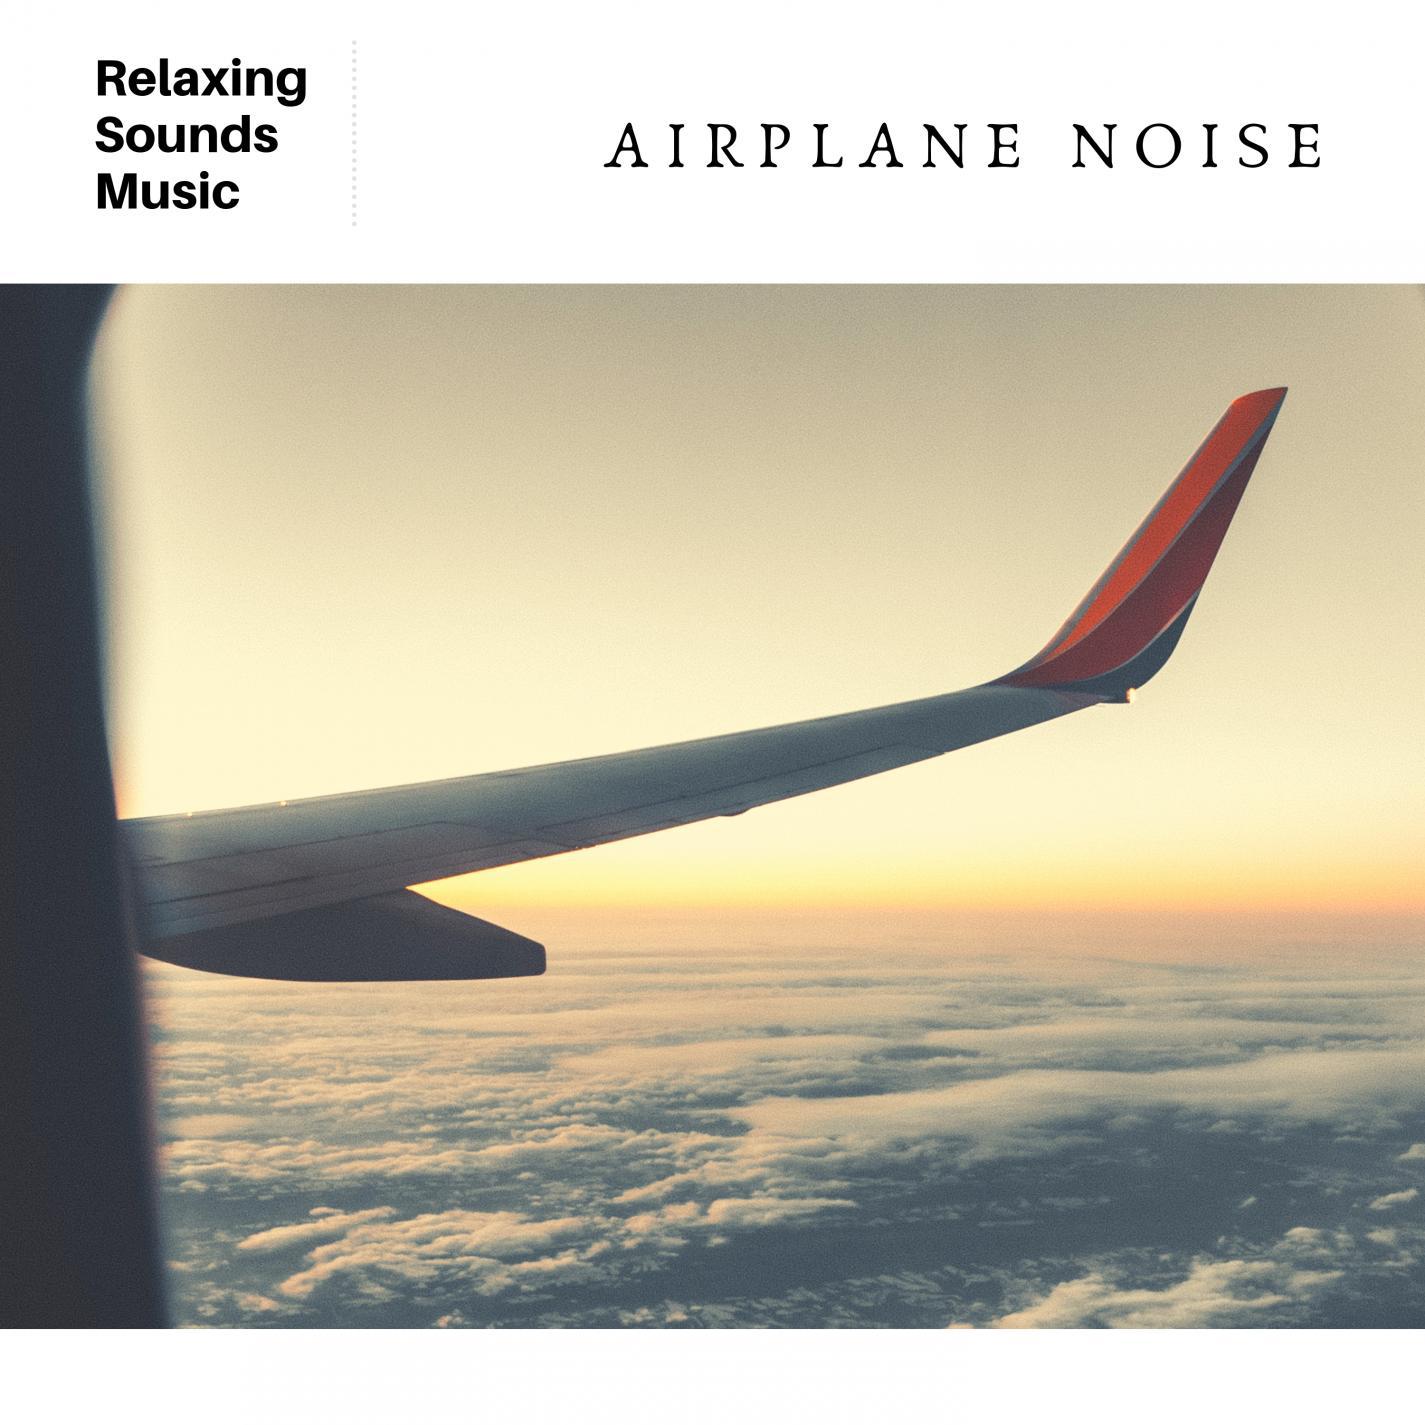 Airplane Noise for Reading